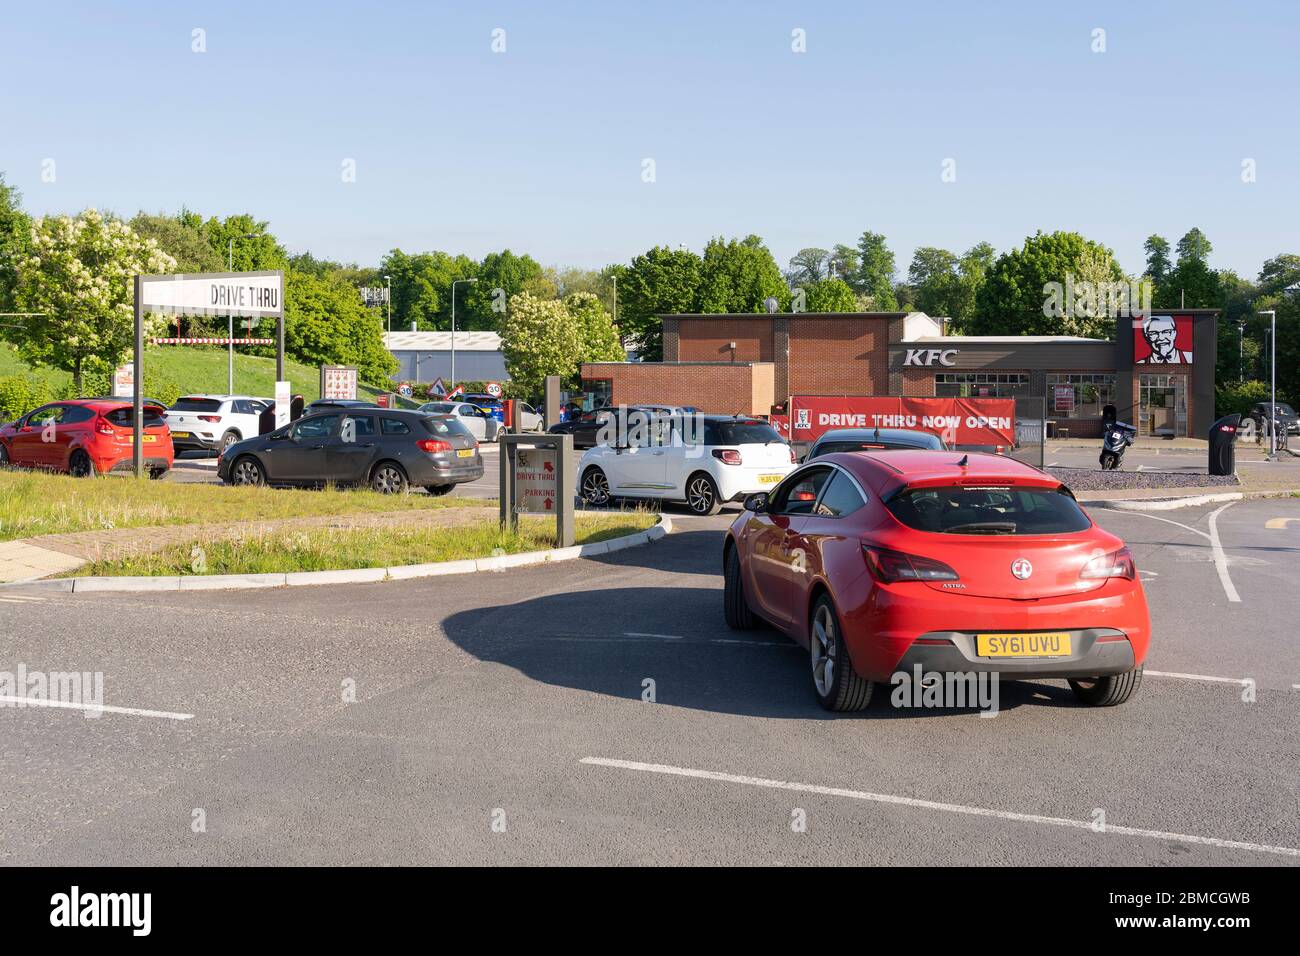 Cars queuing to get into KFC drive thru as lockdown restrictions for Coronavirus Covid-19 are partially lifted. Basingstoke, UK. May 2020 Stock Photo